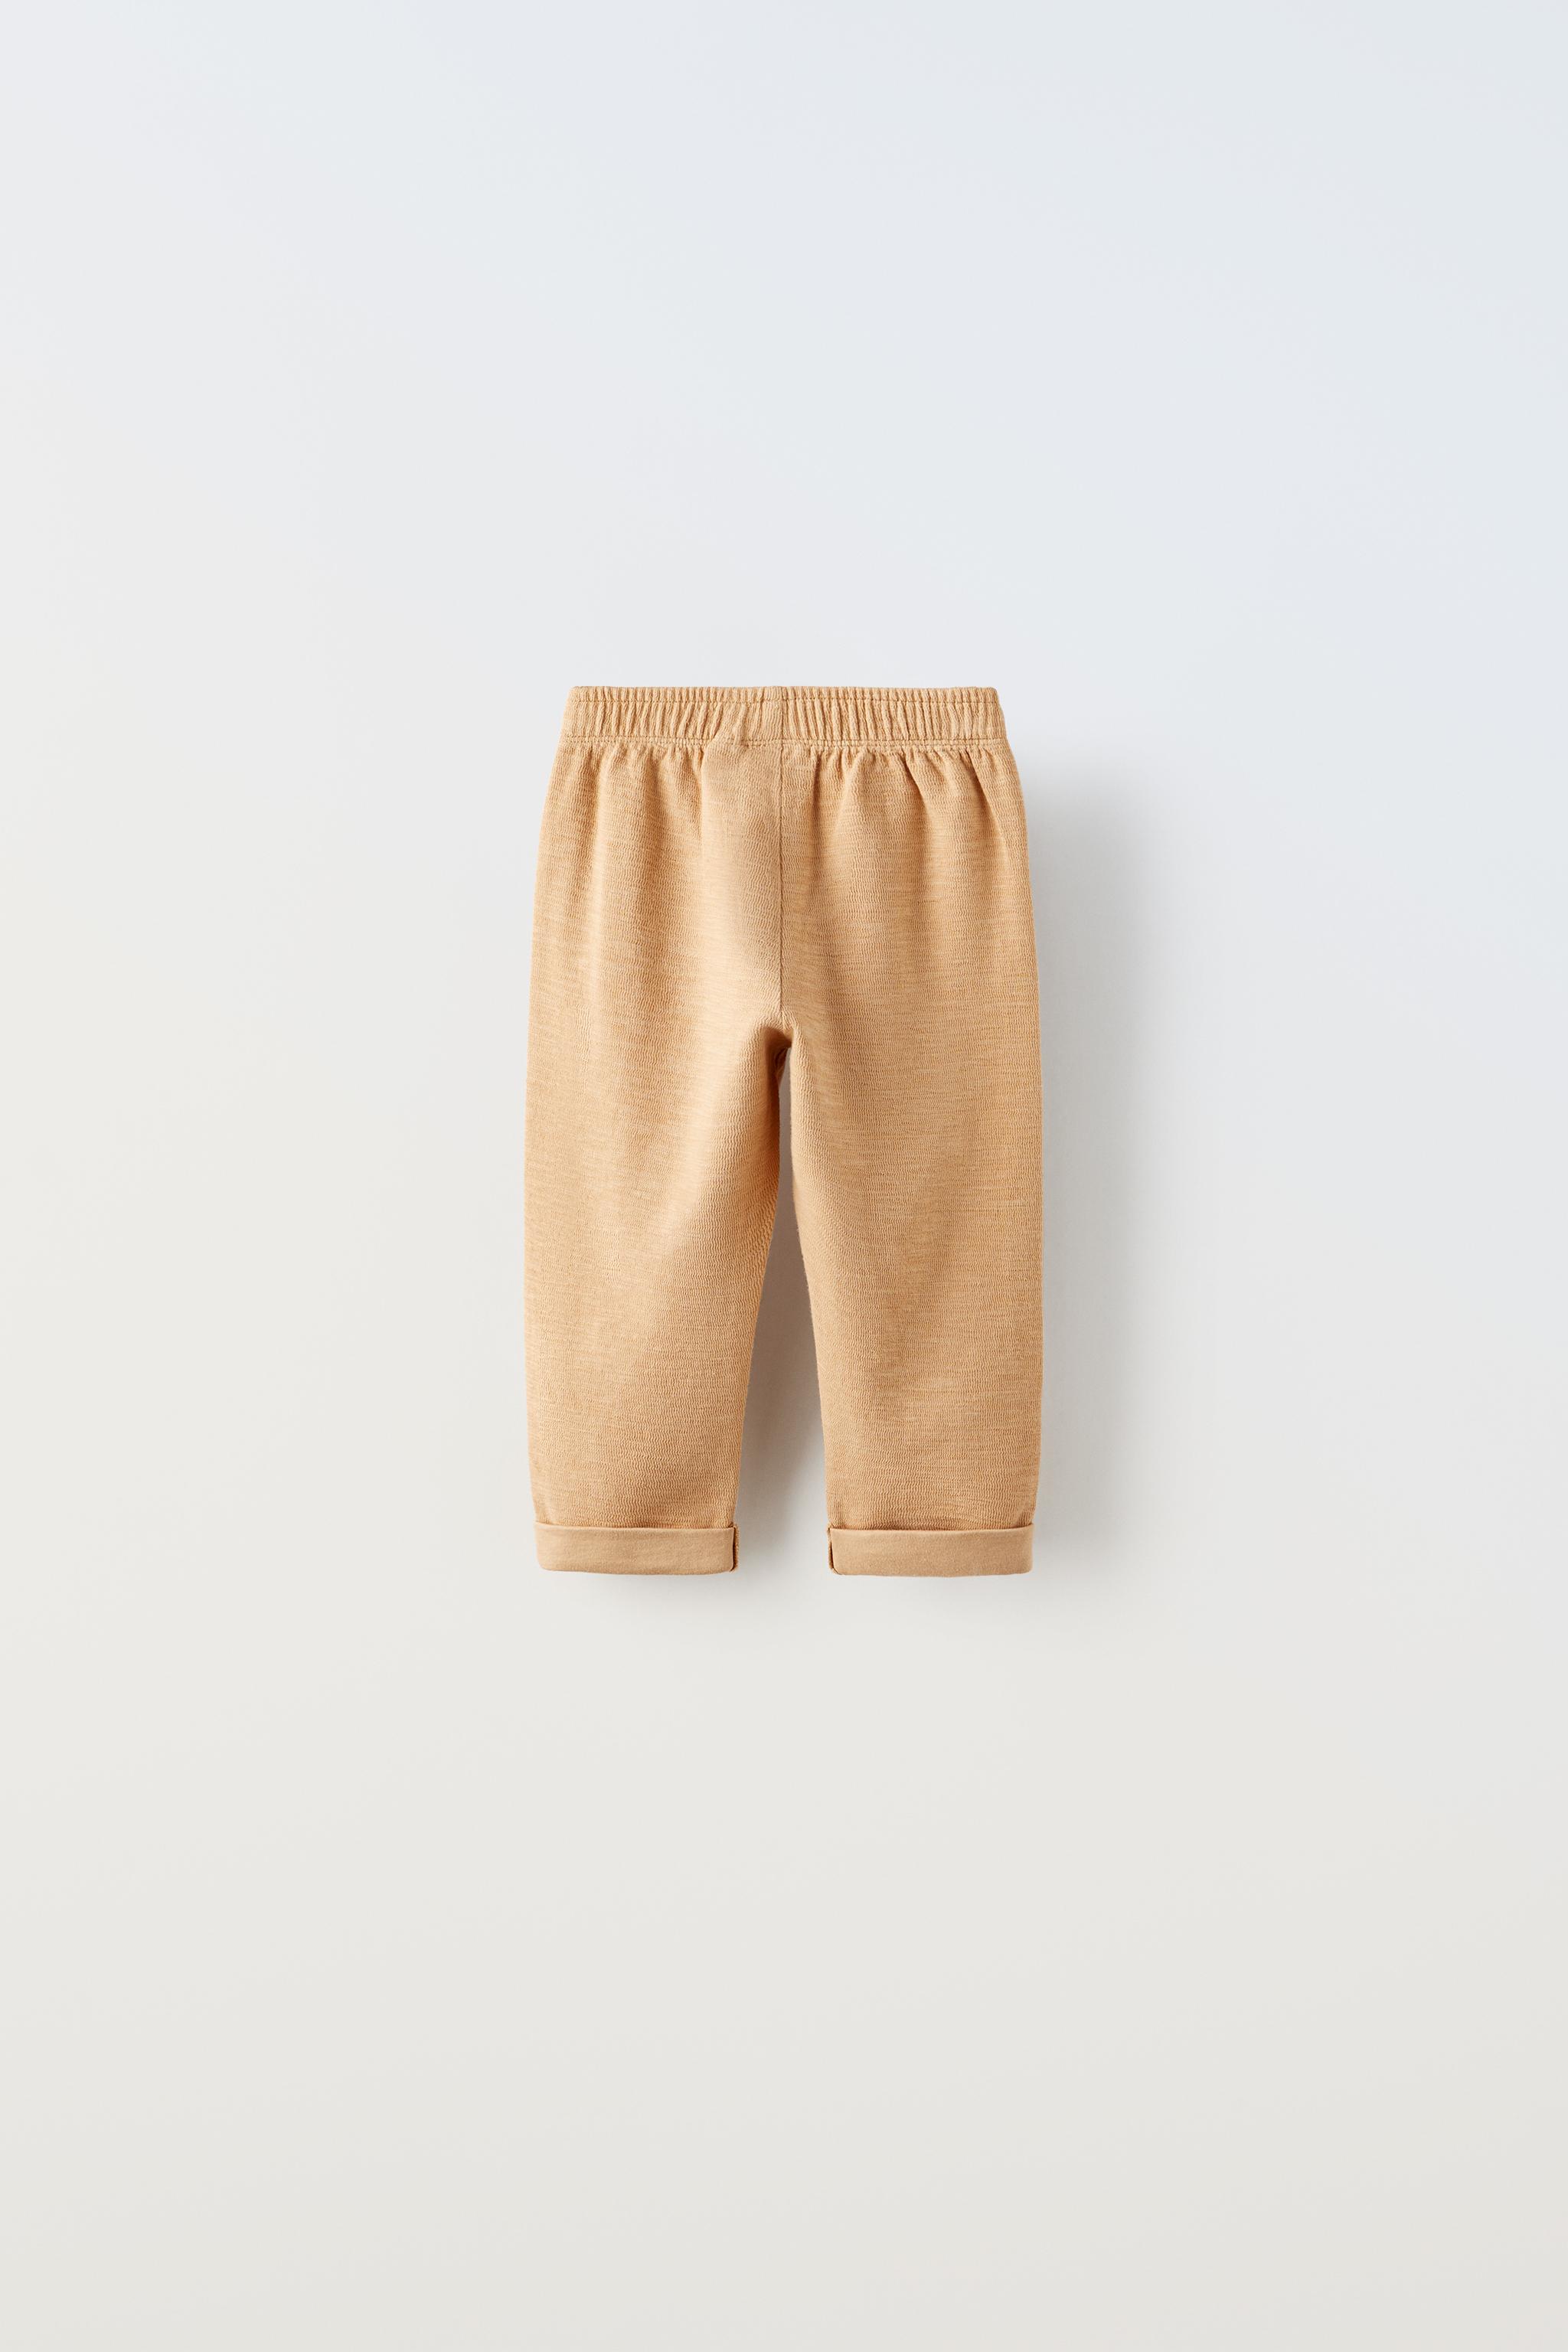 SOFT TOUCH RIBBED PANTS - Gray marl